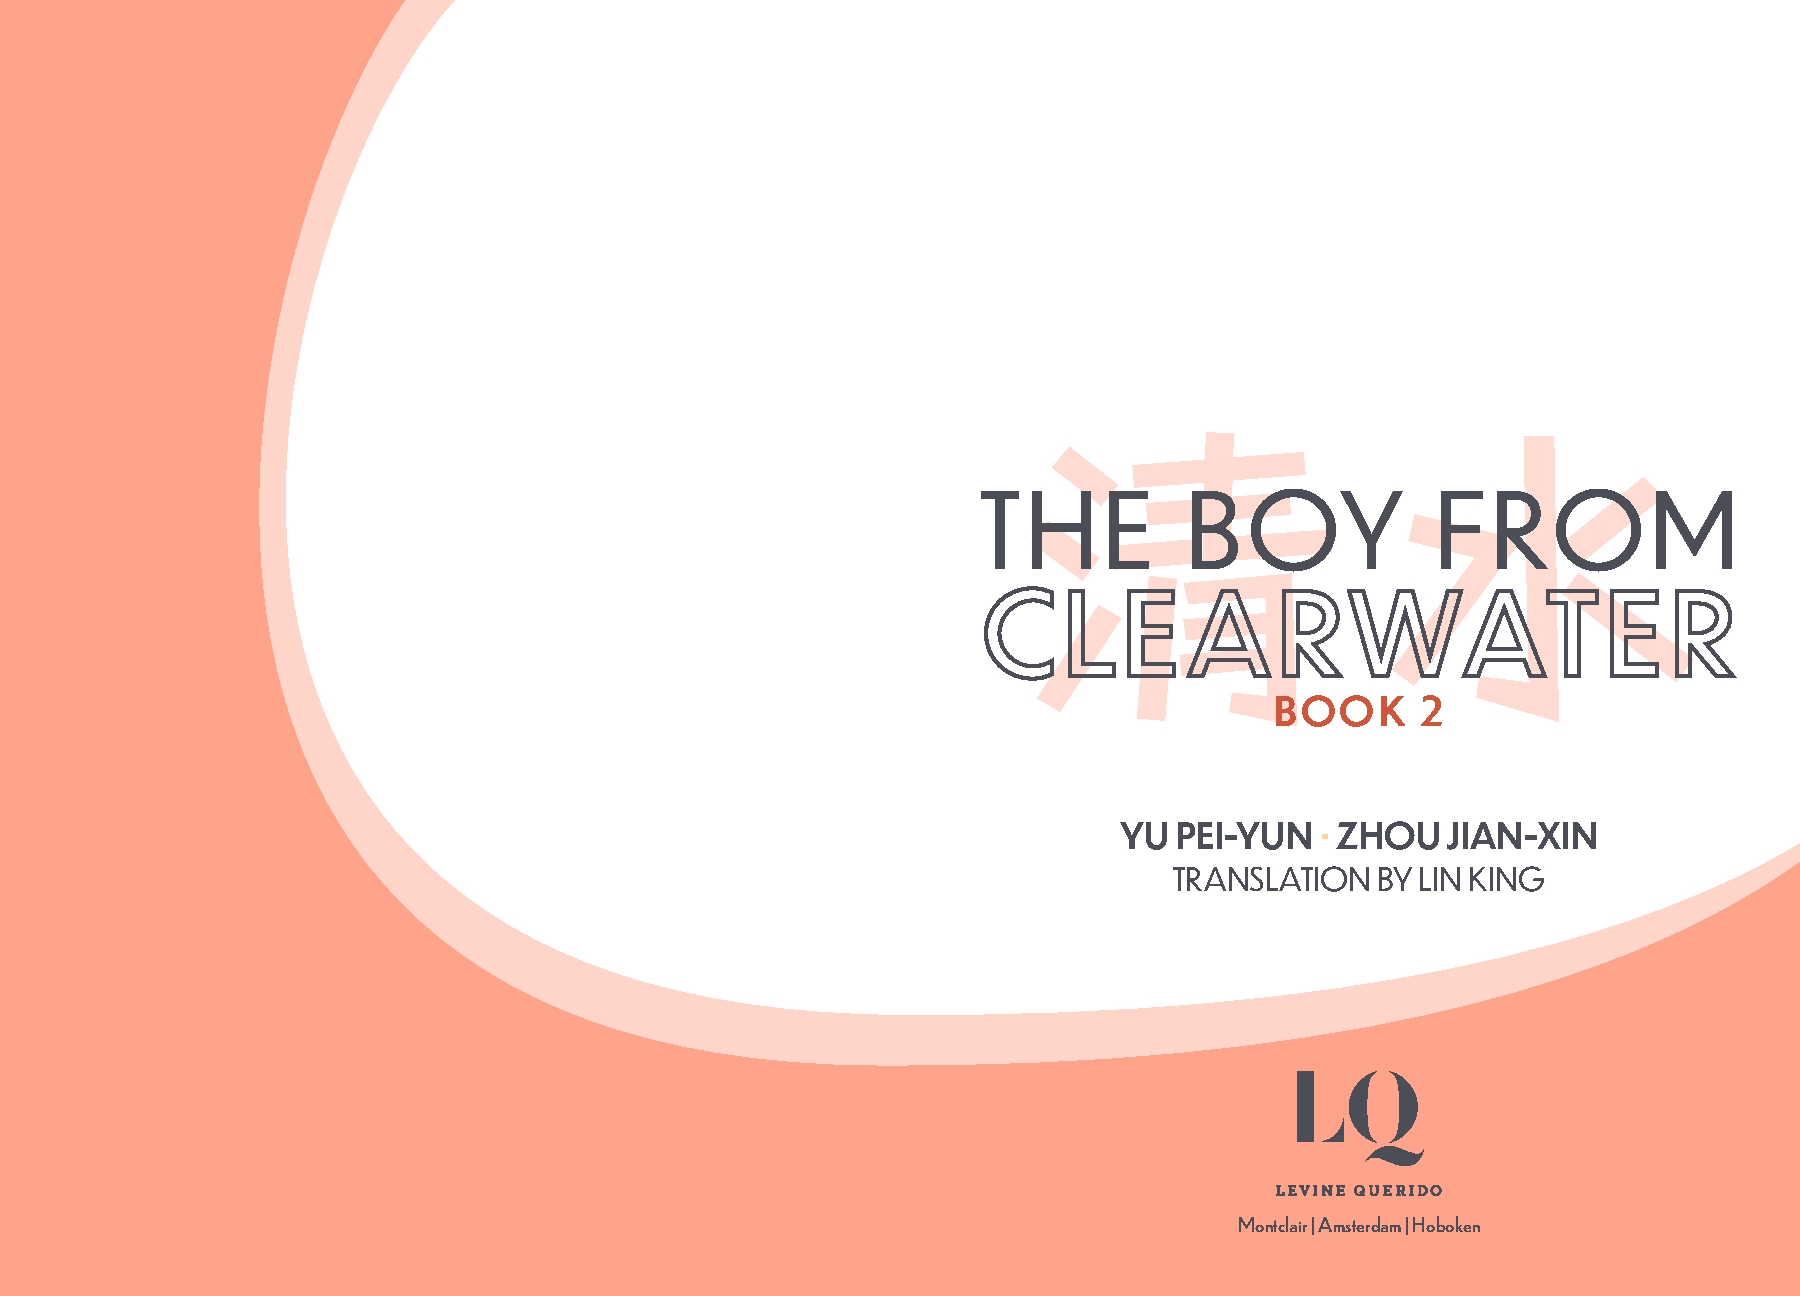 The Boy From Clearwater: Book 2